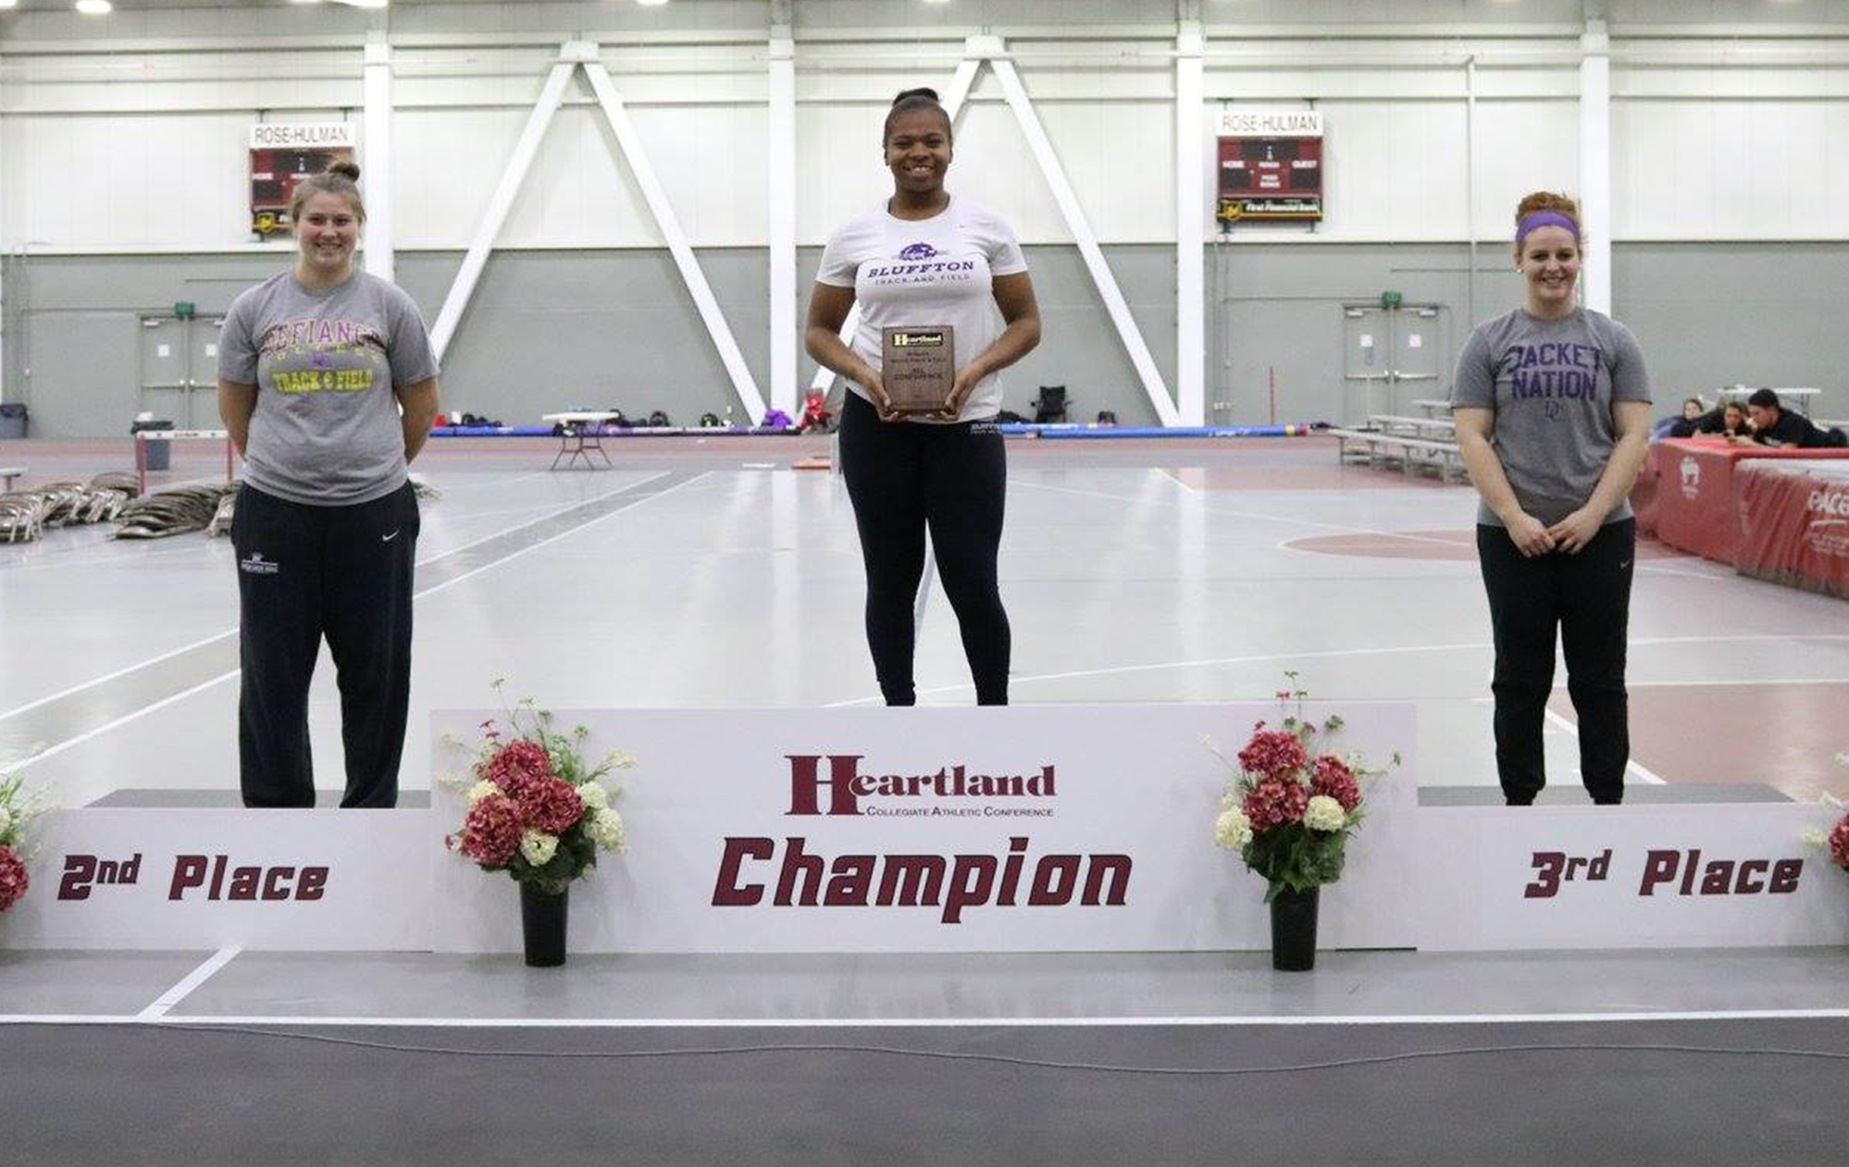 Women Have Strong Showing in Weight at HCAC Championships